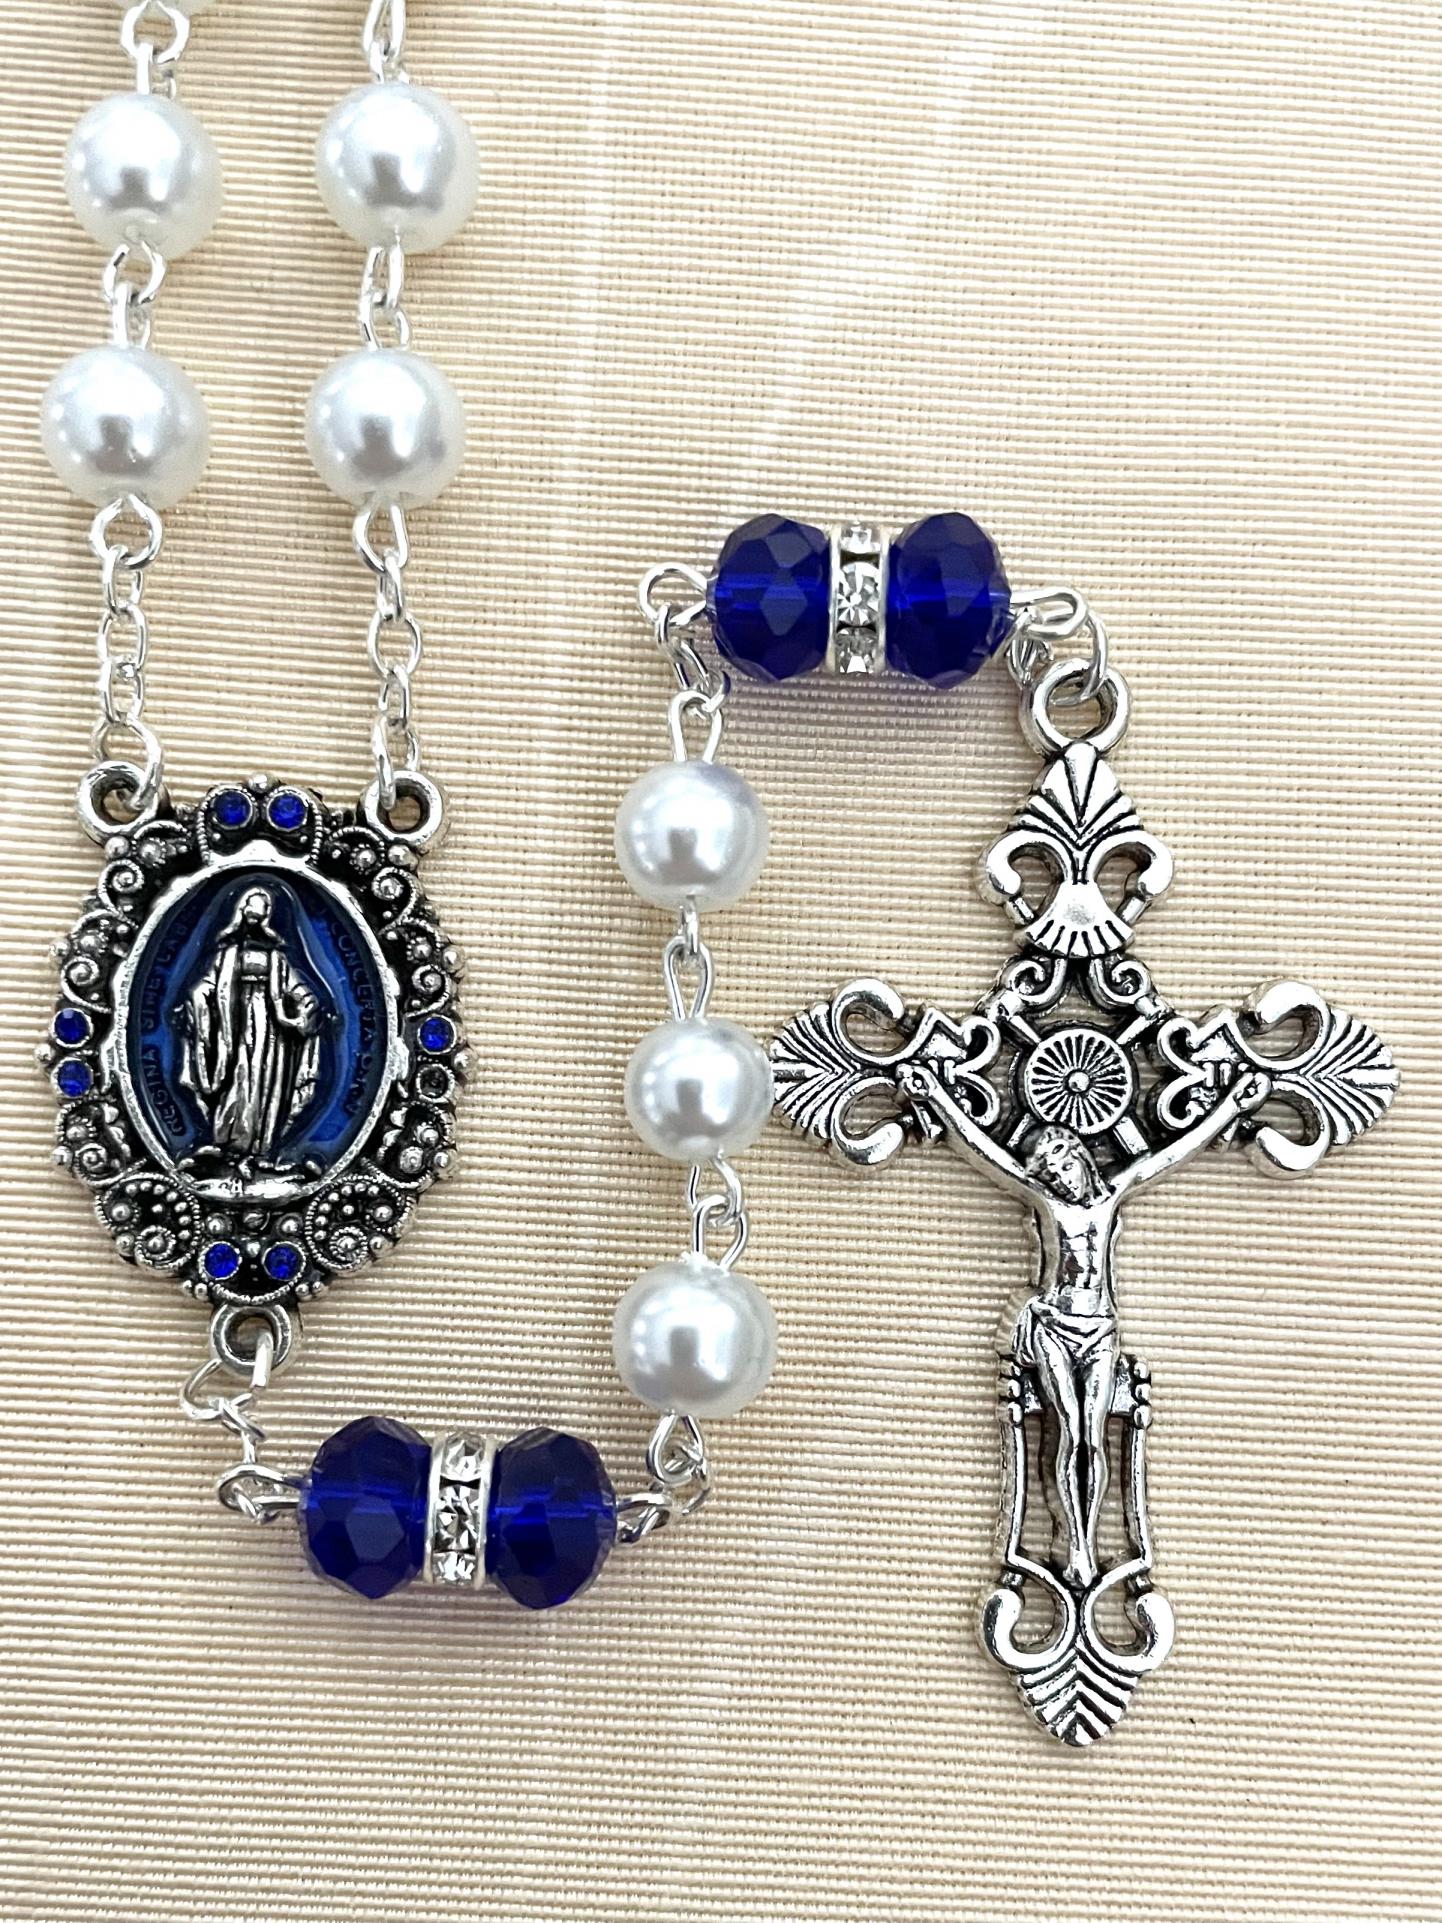 7 MM Pearl Rosary with Sapphire Rhinestone OF Beads and Enameled Centerpiece